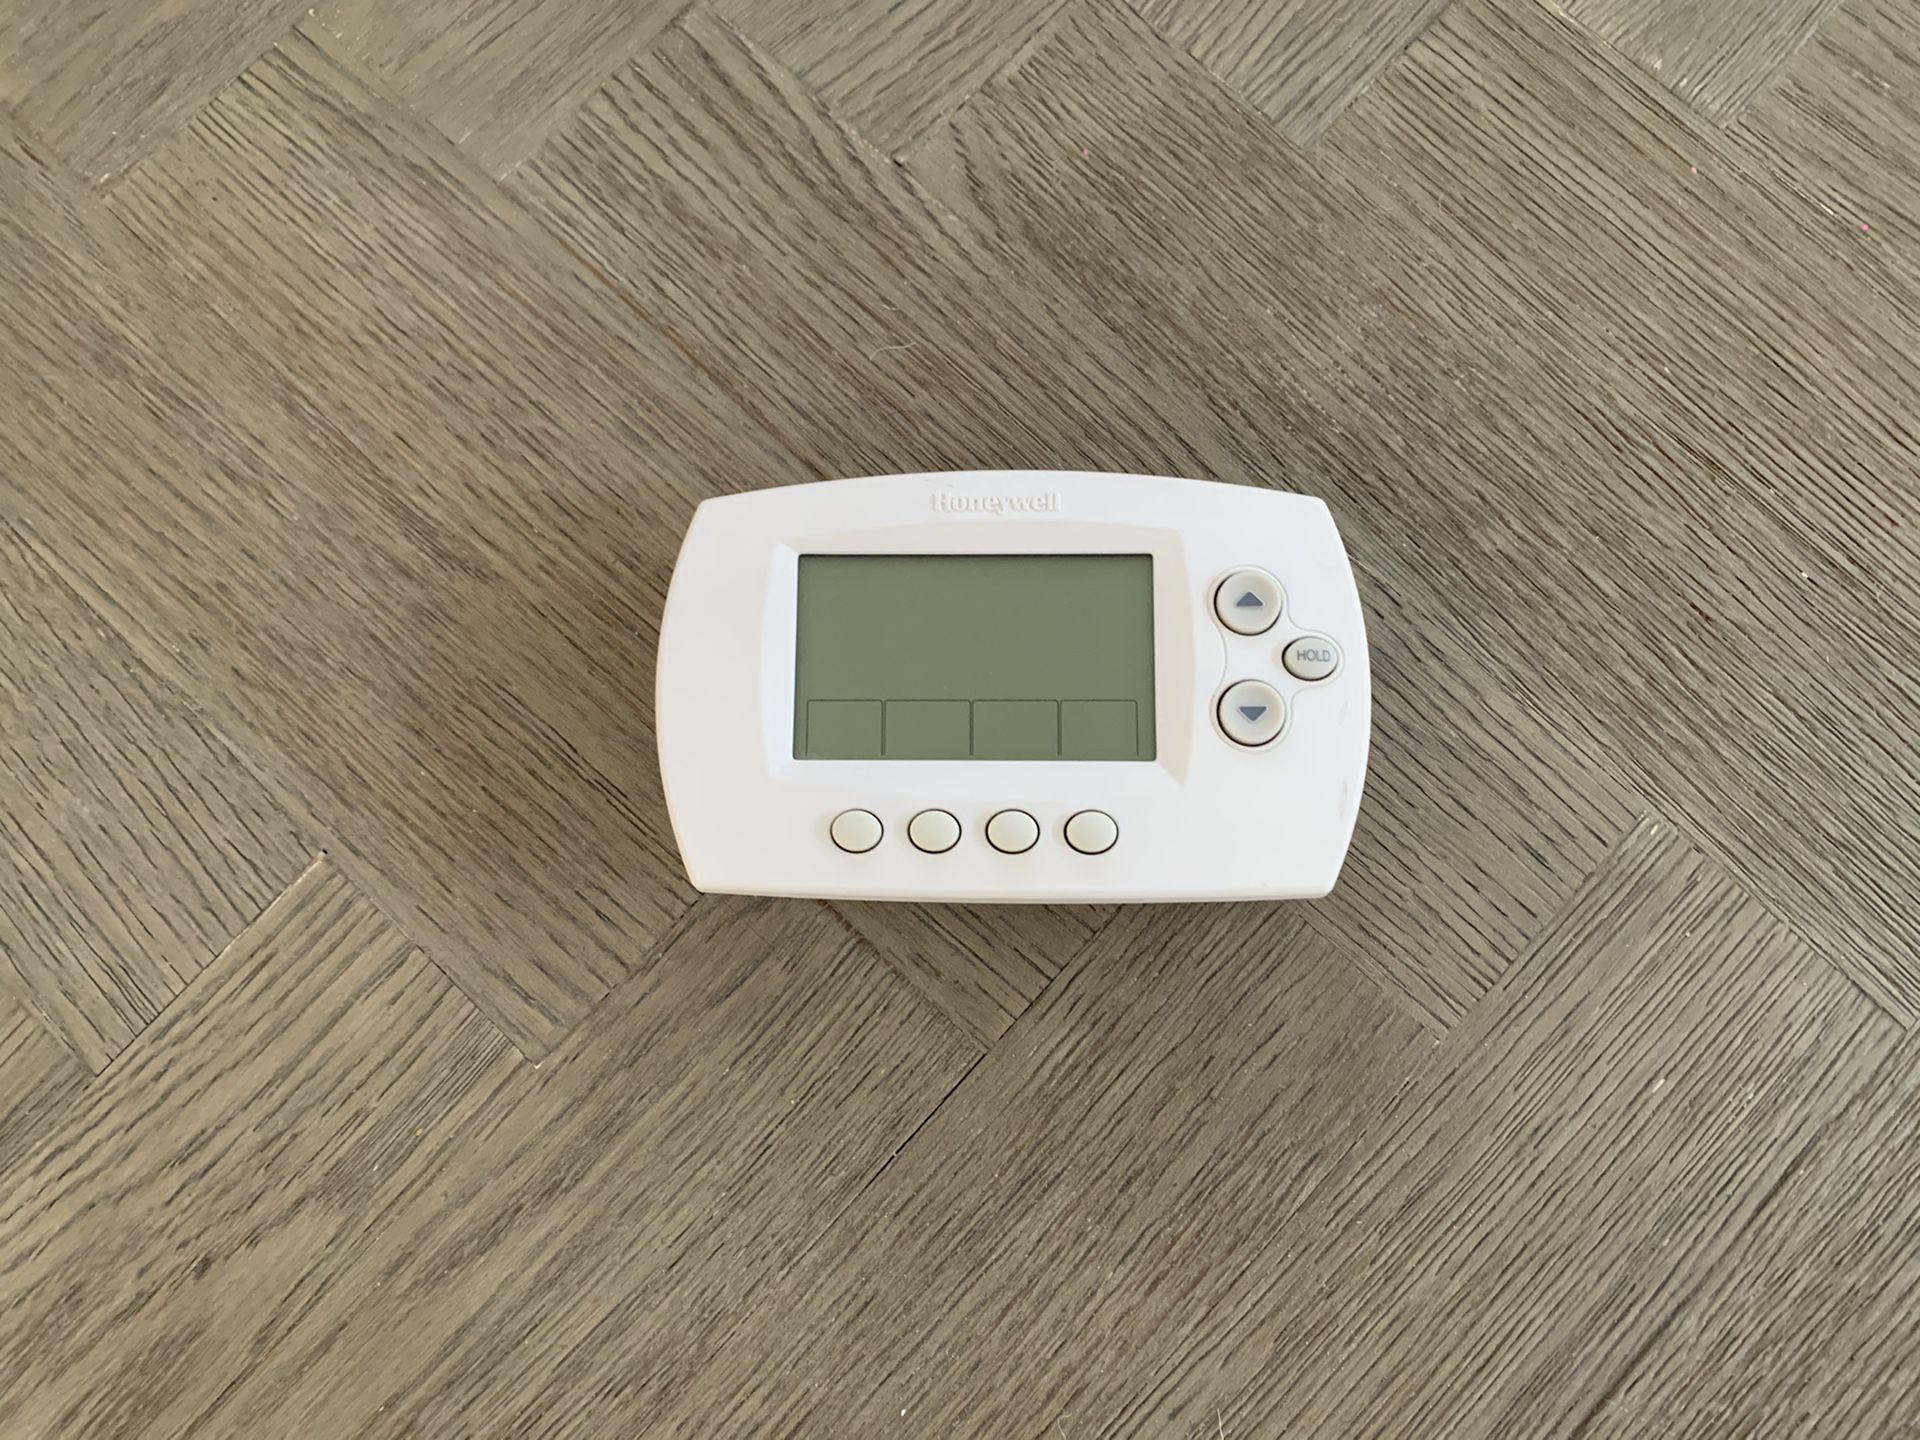 Honeywell WI-FI 7-Day Programmable Thermostat